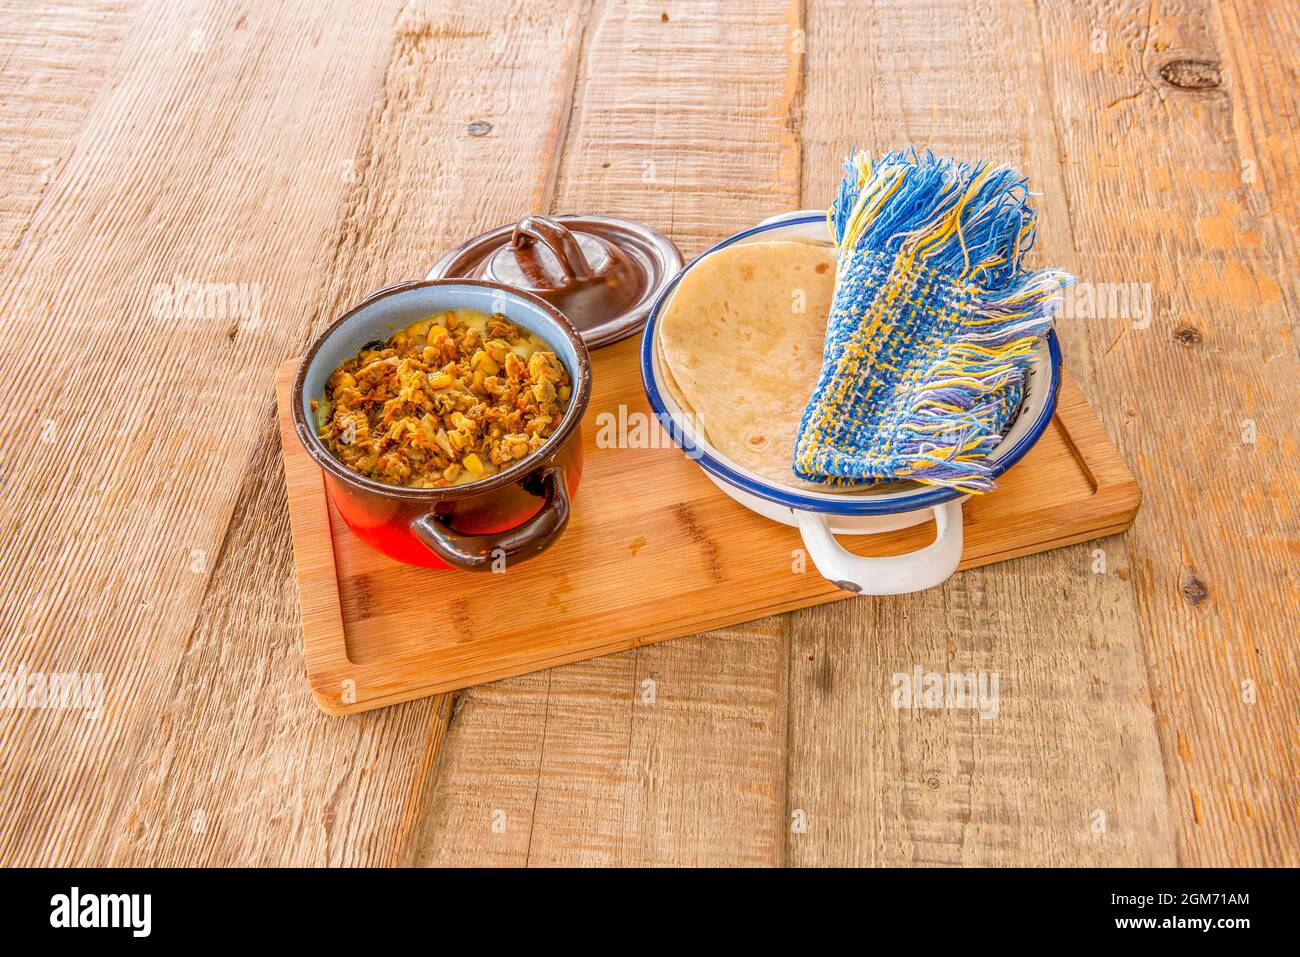 Enamel tart pan with Mexican flower cheese tacos with corn tortillas in a white bowl Stock Photo